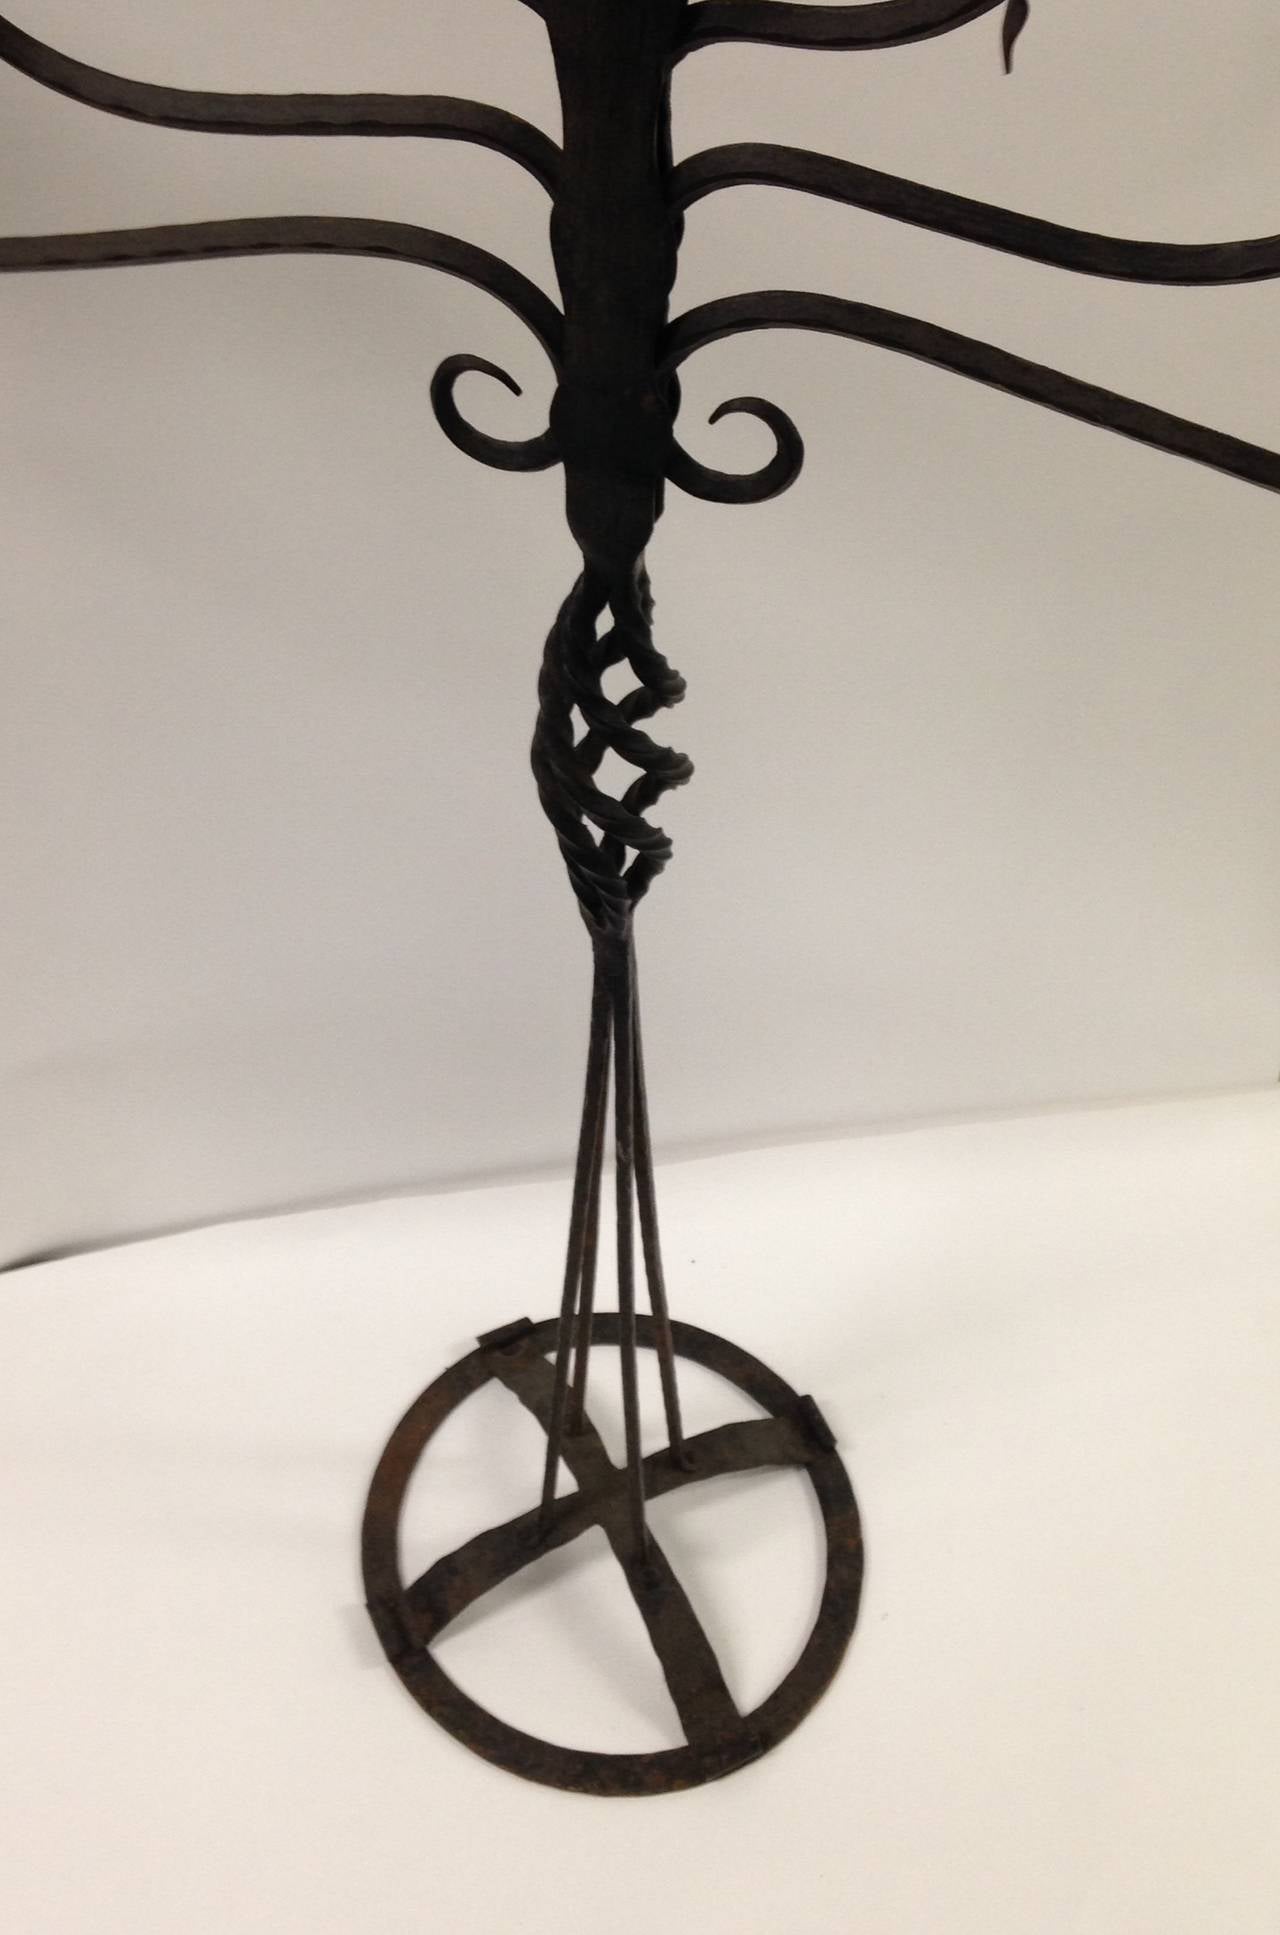 Standing iron candelabra, forged iron with seven lights. Base is a domed open strap, shaft is twisted. The seven lights are ornamented with leaf forms.
Swedish, handcrafted, circa 1940.